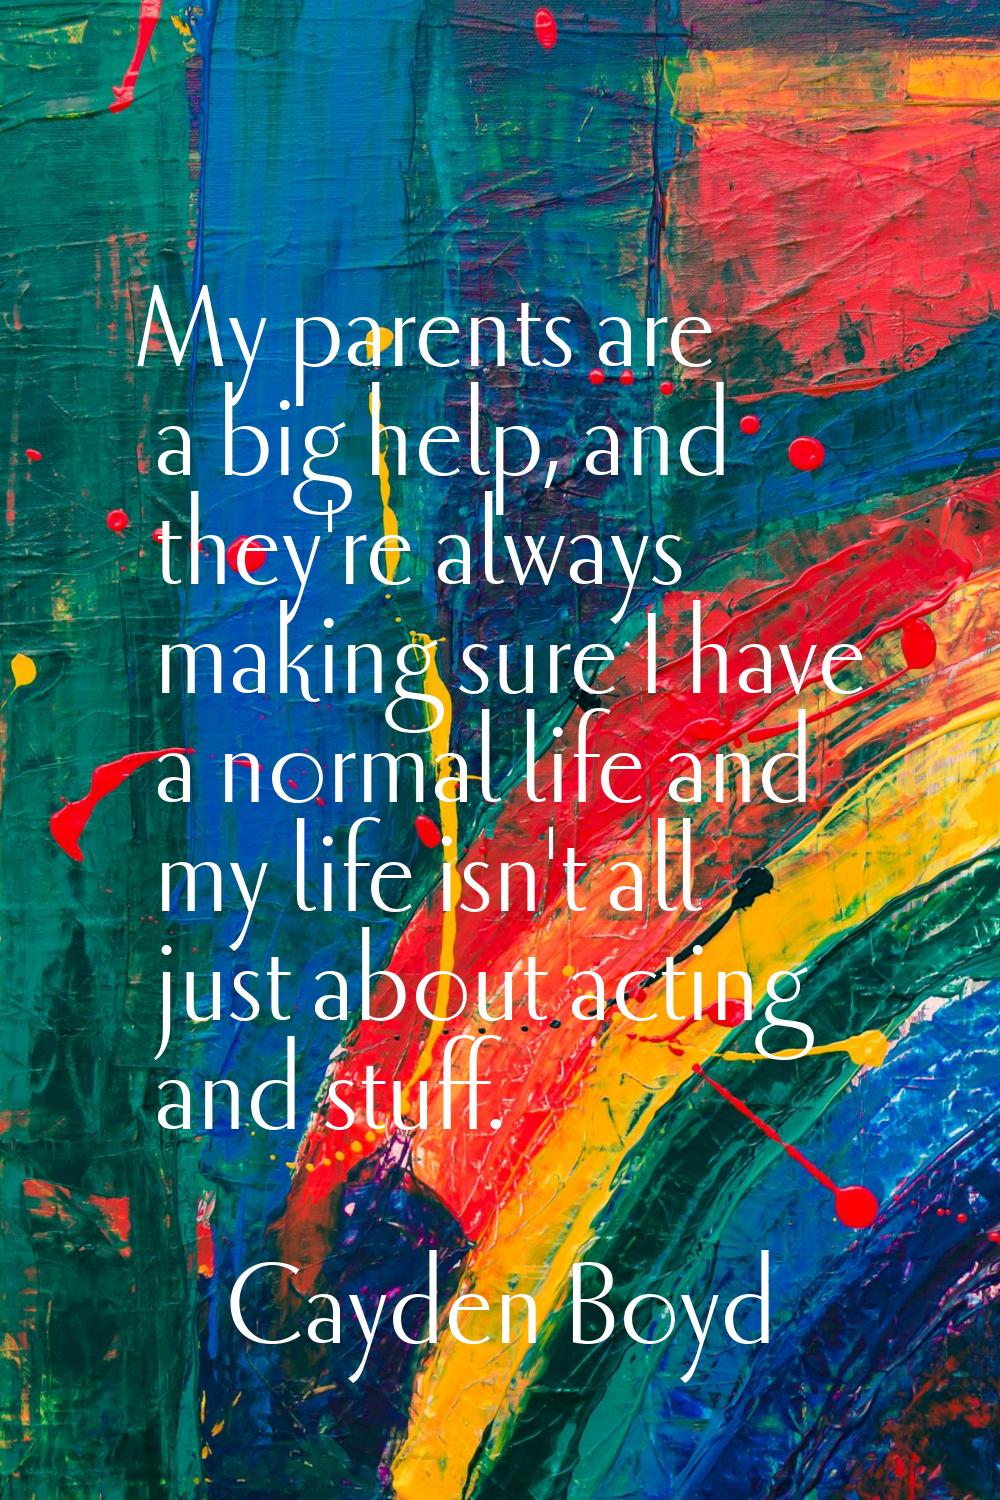 My parents are a big help, and they're always making sure I have a normal life and my life isn't al